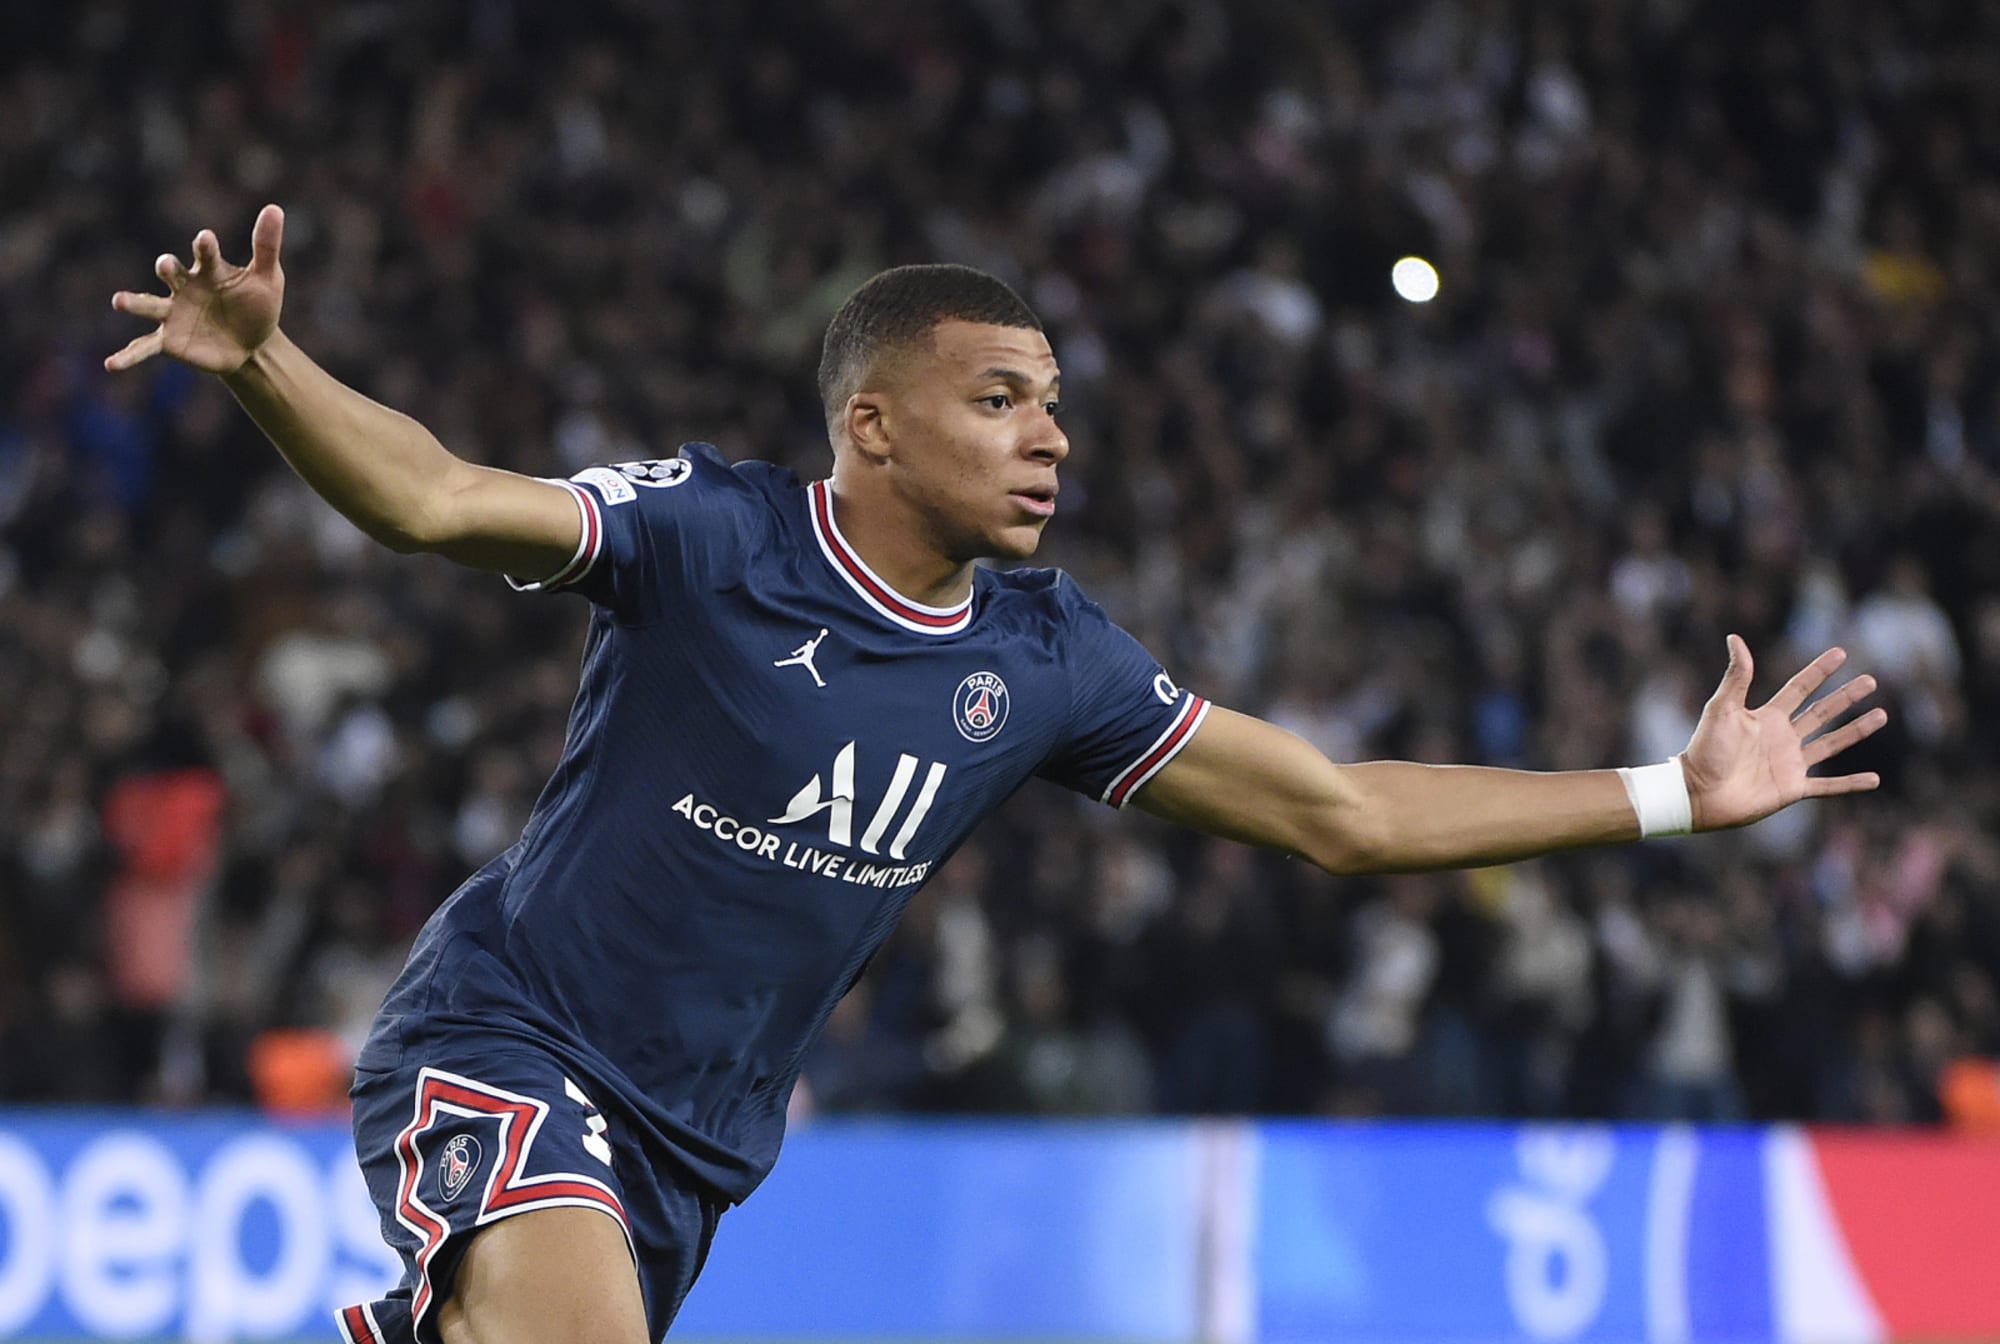 Why Real Madrid might offer PSG a transfer fee for Mbappe this winter